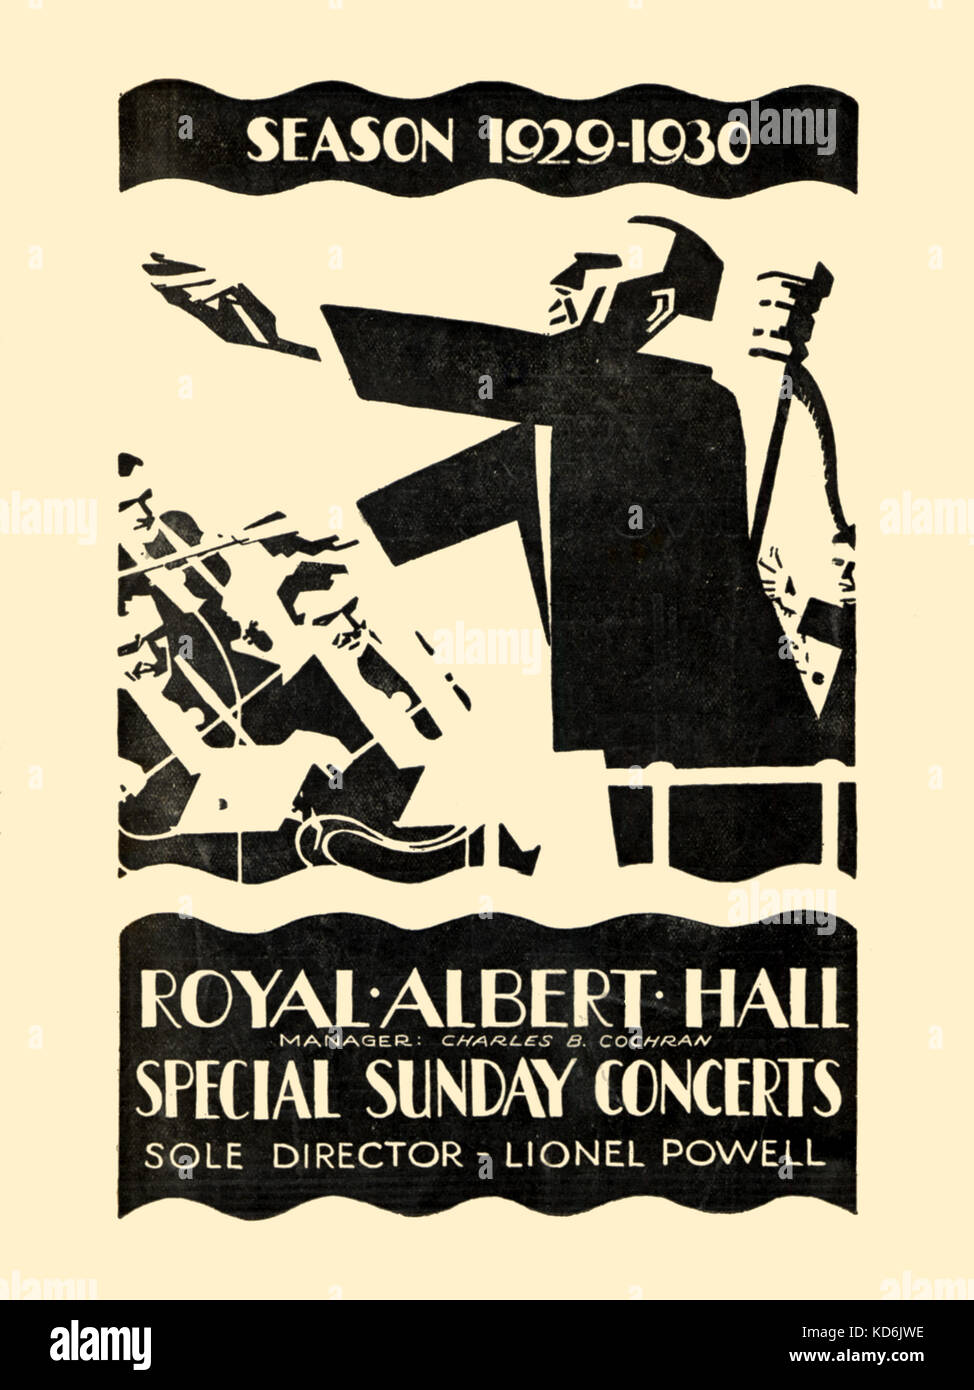 Programme cover for special Sunday concerts at the Royal Albert Hall, London. Season 1929-1930. Geometric illustration showing conductor with baton and part of orchestra.   Typical/generic conductor. Stock Photo